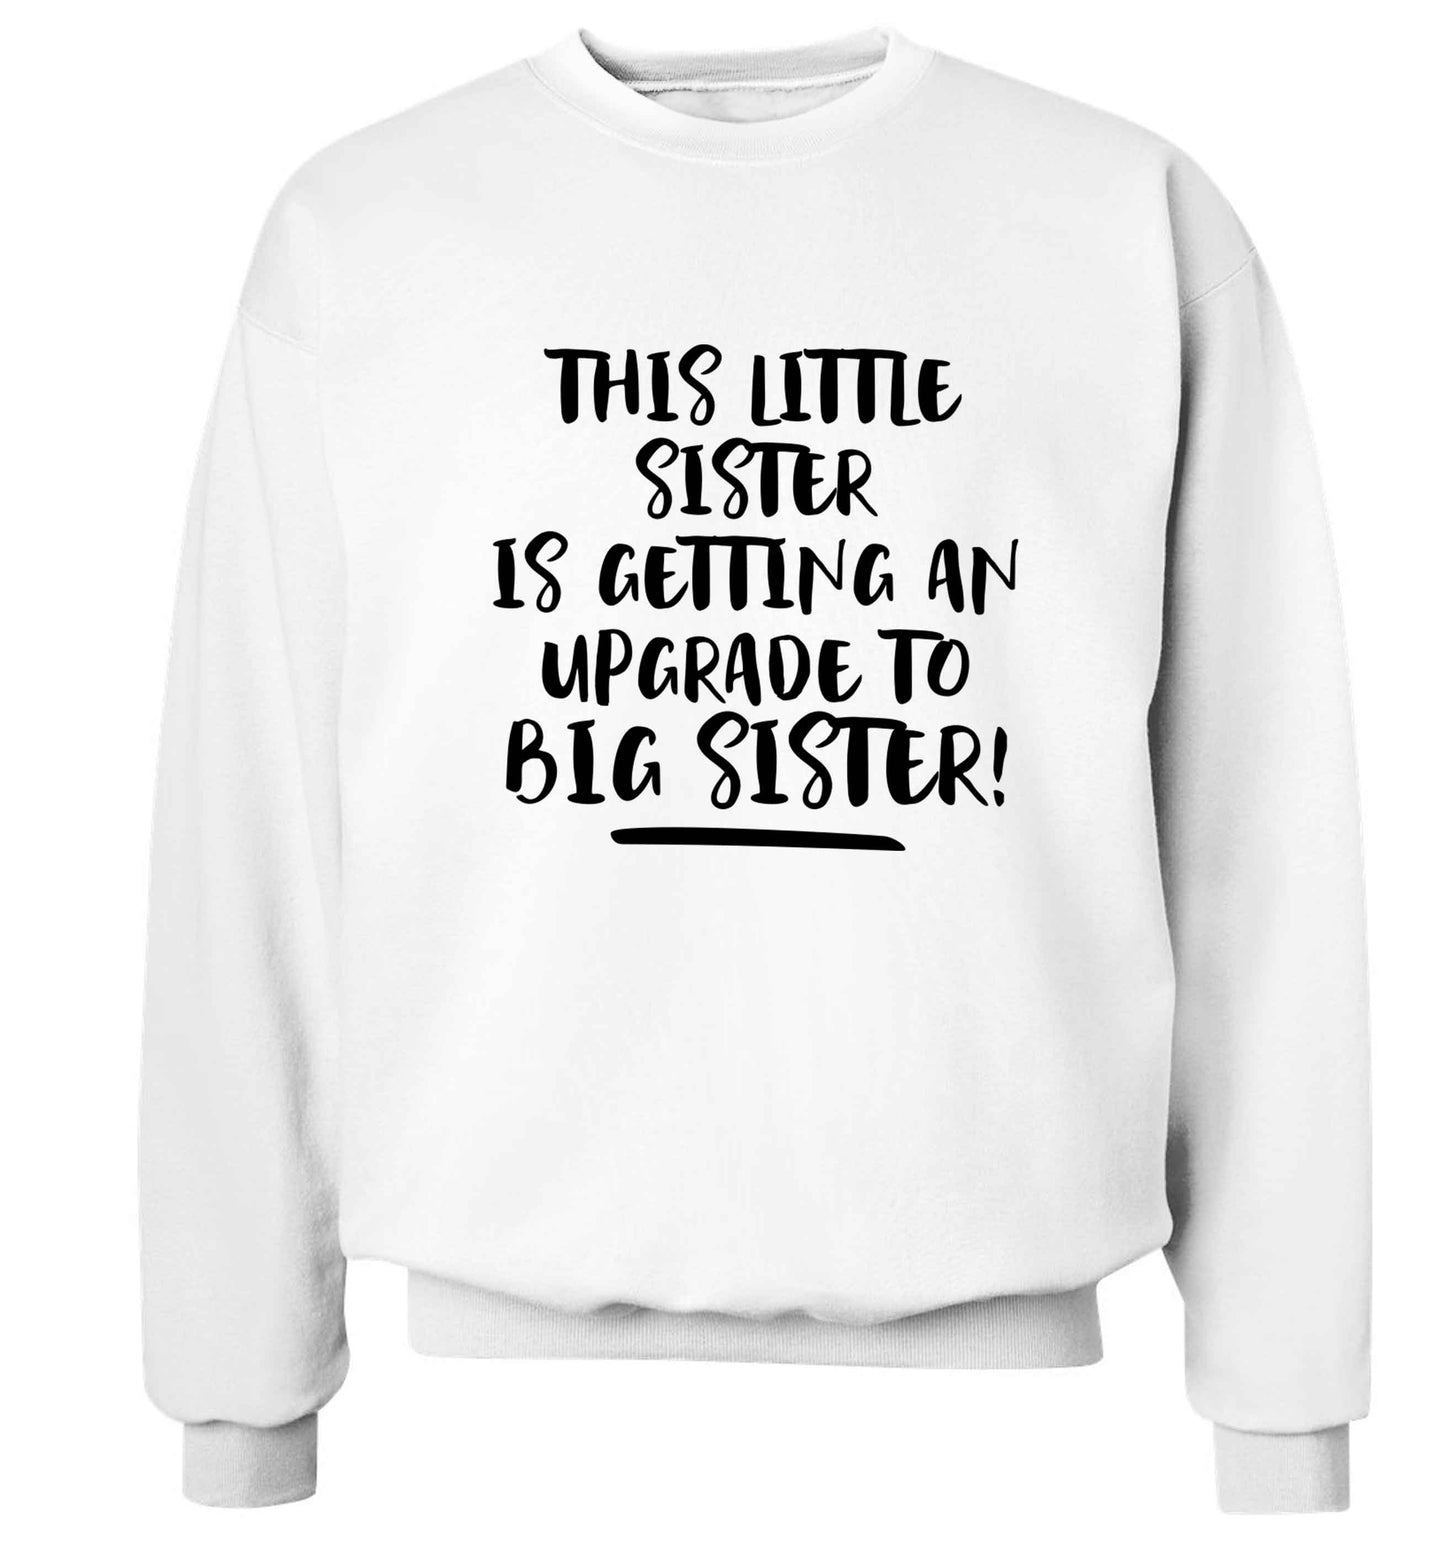 This little sister is getting an upgrade to big sister! Adult's unisex white Sweater 2XL